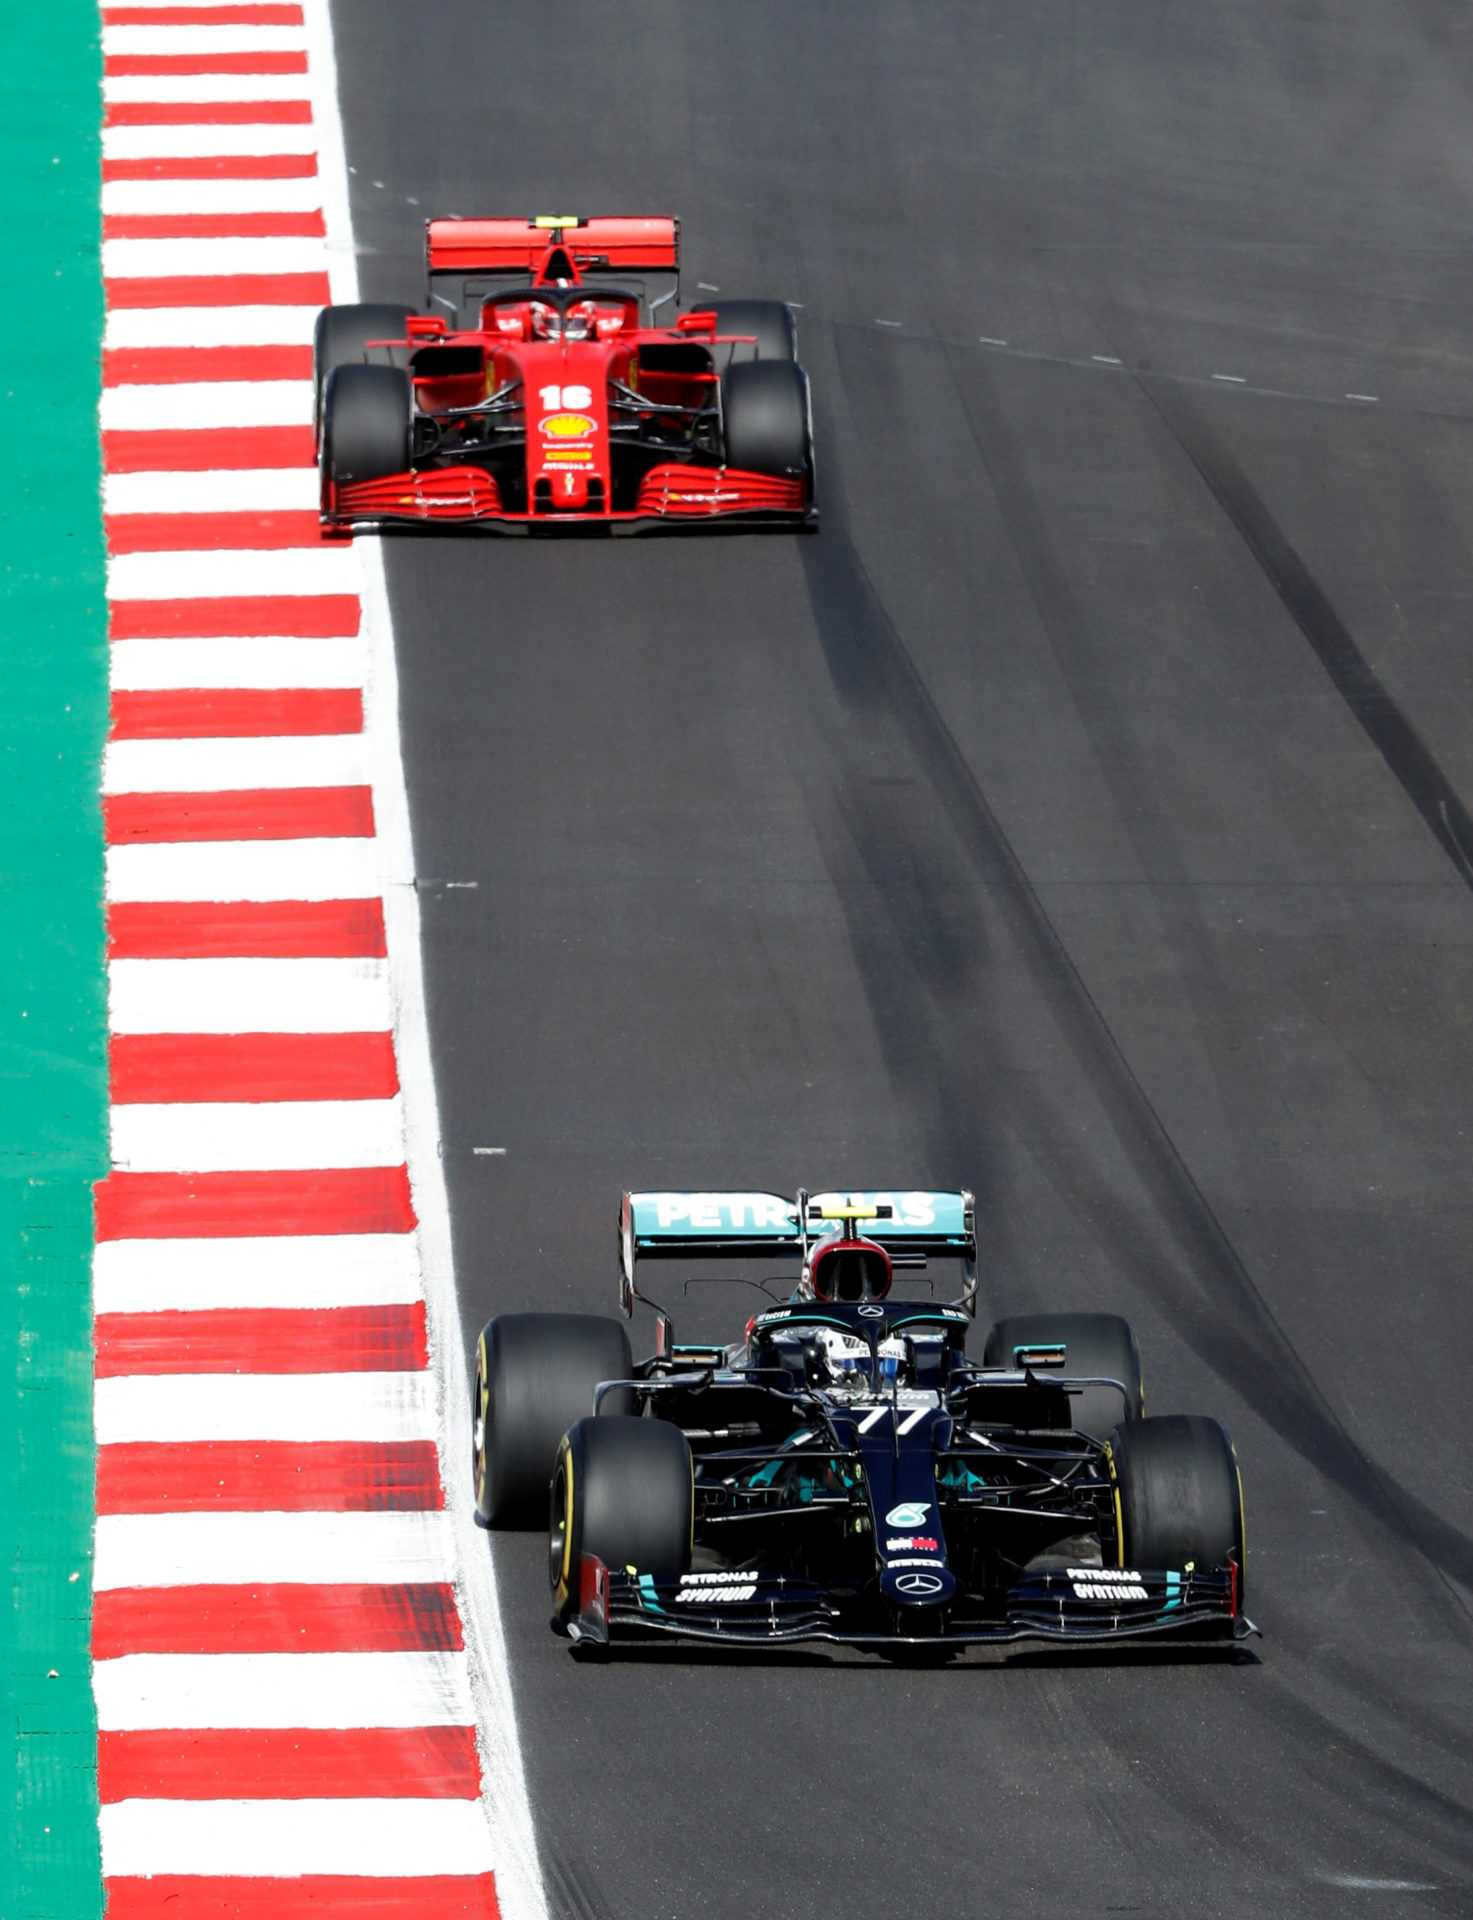 Ferrari trying to chase down Mercedes at Portuguese GP